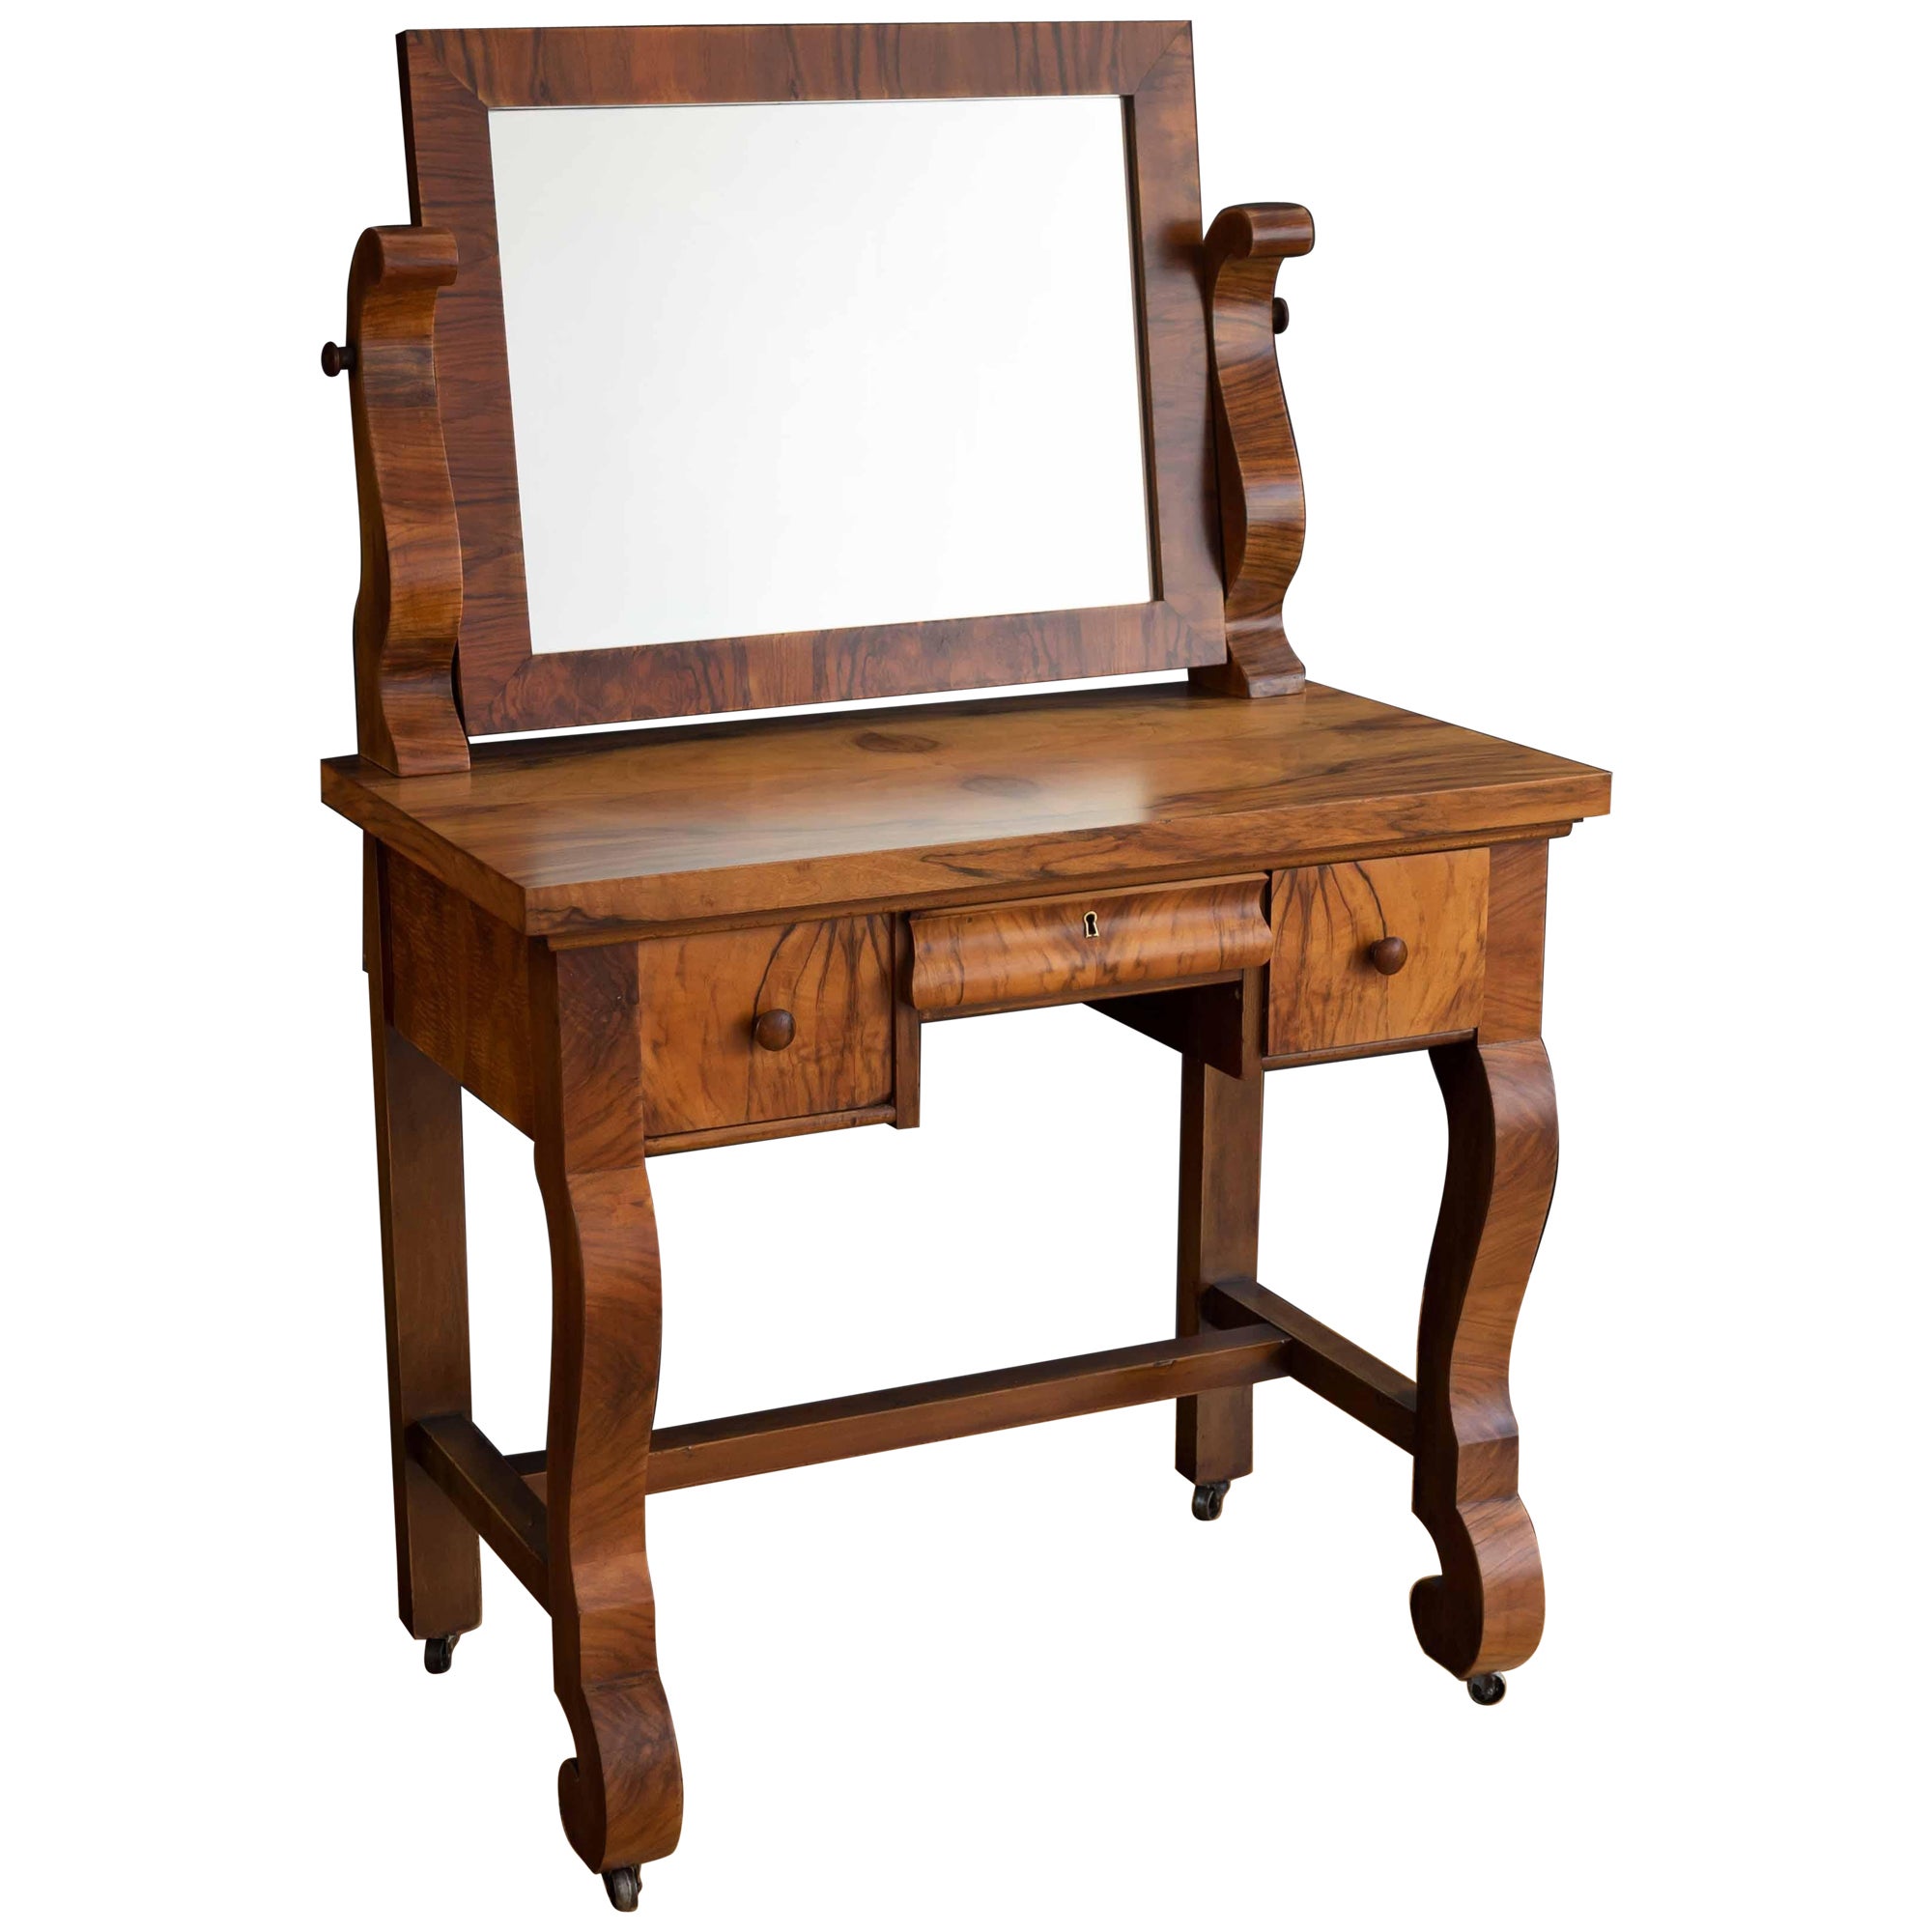 Antique 1900's Rosewood Empire Dressing Table / Vanity For Sale